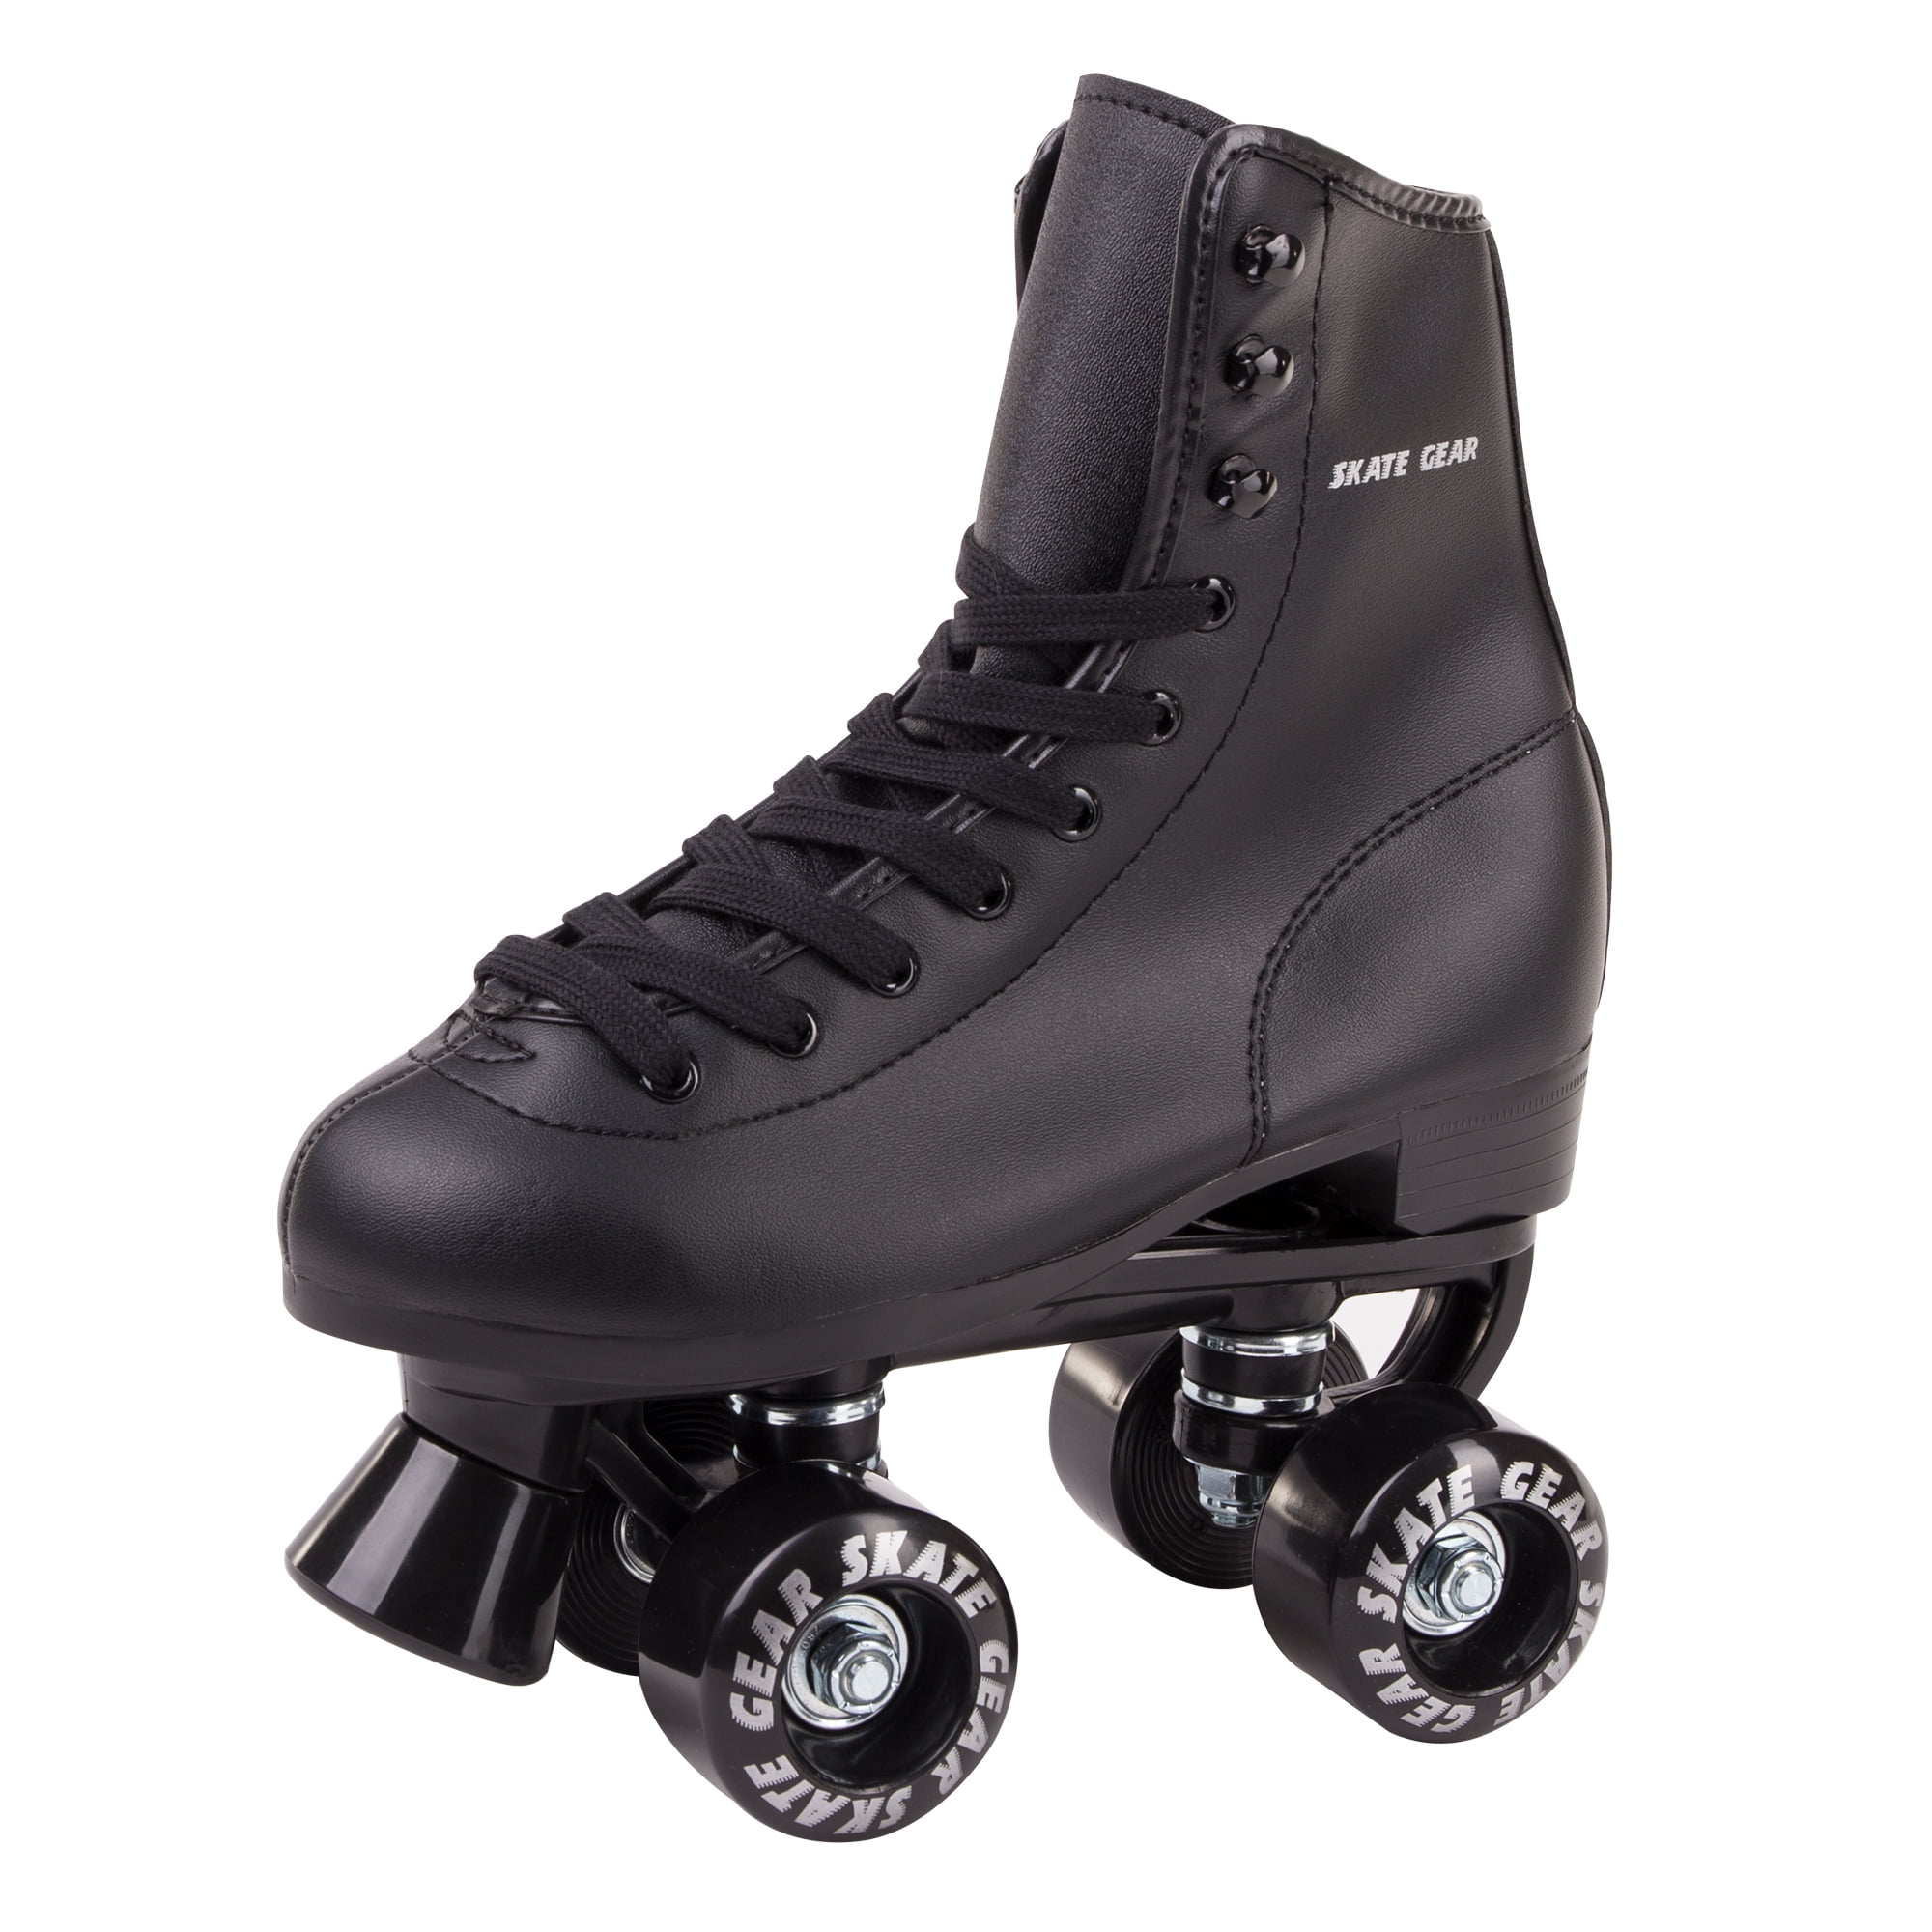 KongLyle Women Men Skate Double Row Pulley Gear Soft Boot Roller Skate Retro High Top Design Indoor Outdoor with Flashing Wheel